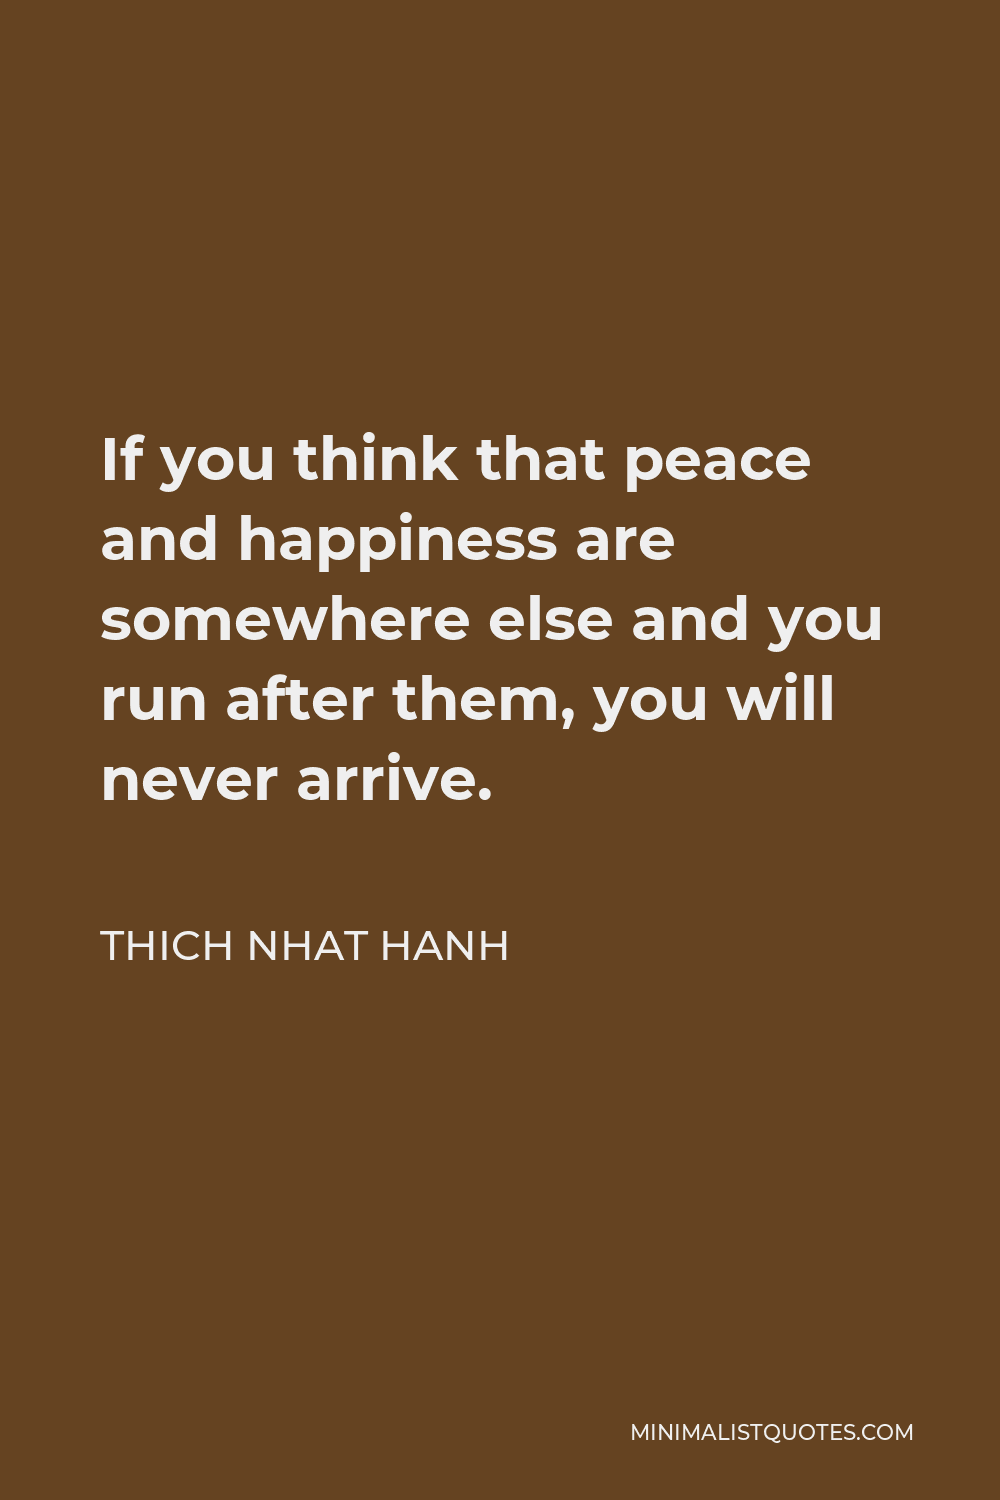 Thich Nhat Hanh Quote - If you think that peace and happiness are somewhere else and you run after them, you will never arrive.